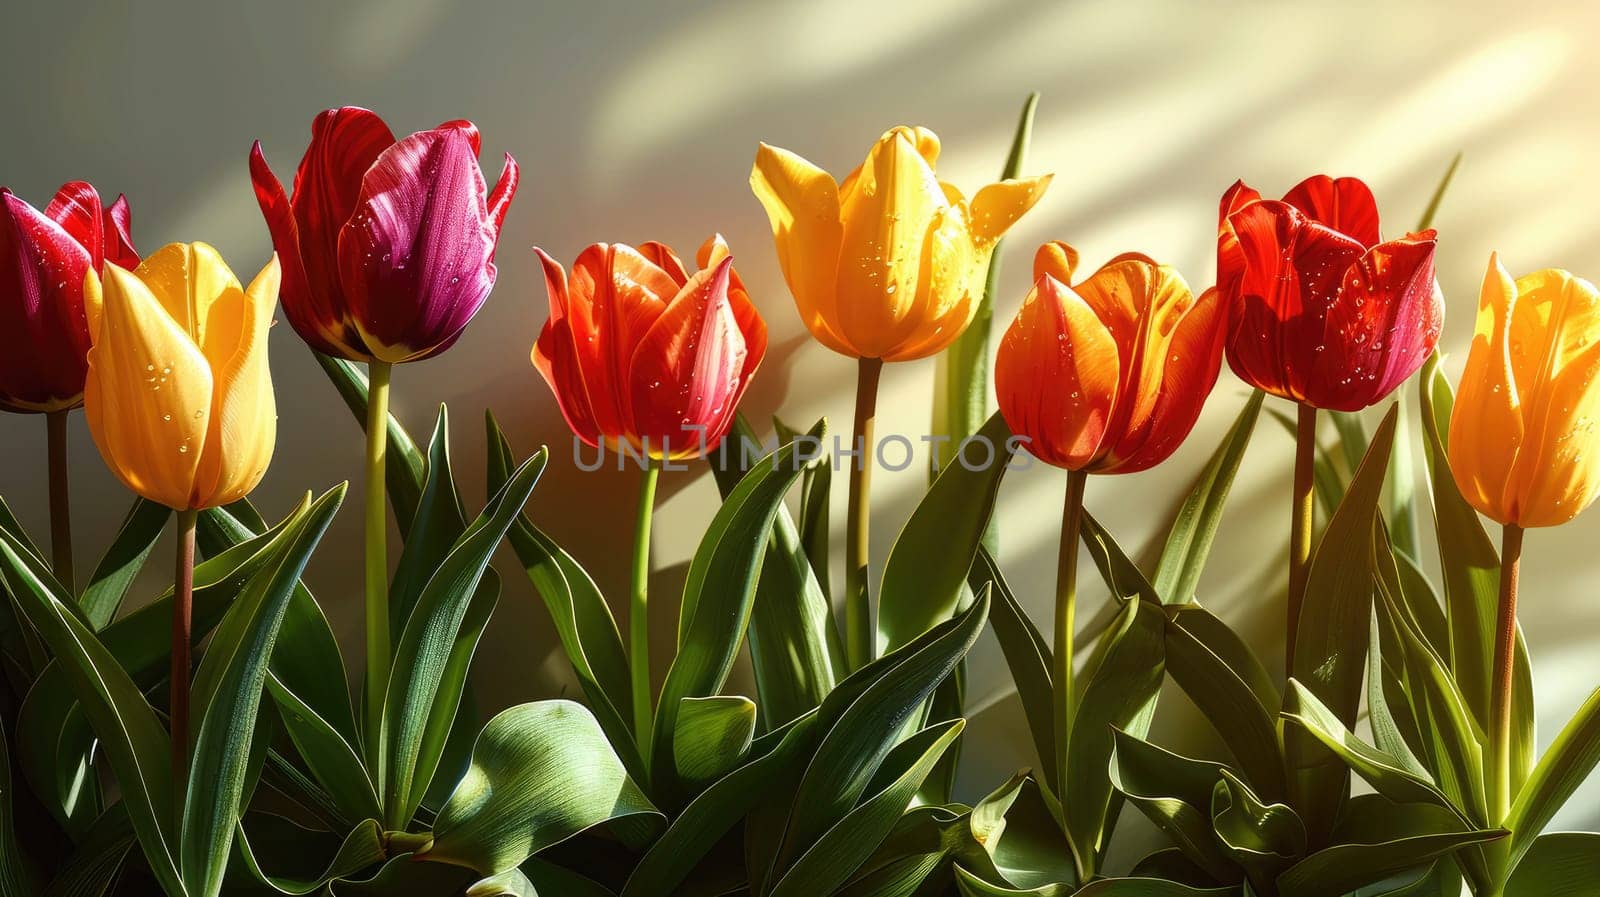 Colorful tulips create rainbow inspiration against a light background of spring tenderness by Yurich32